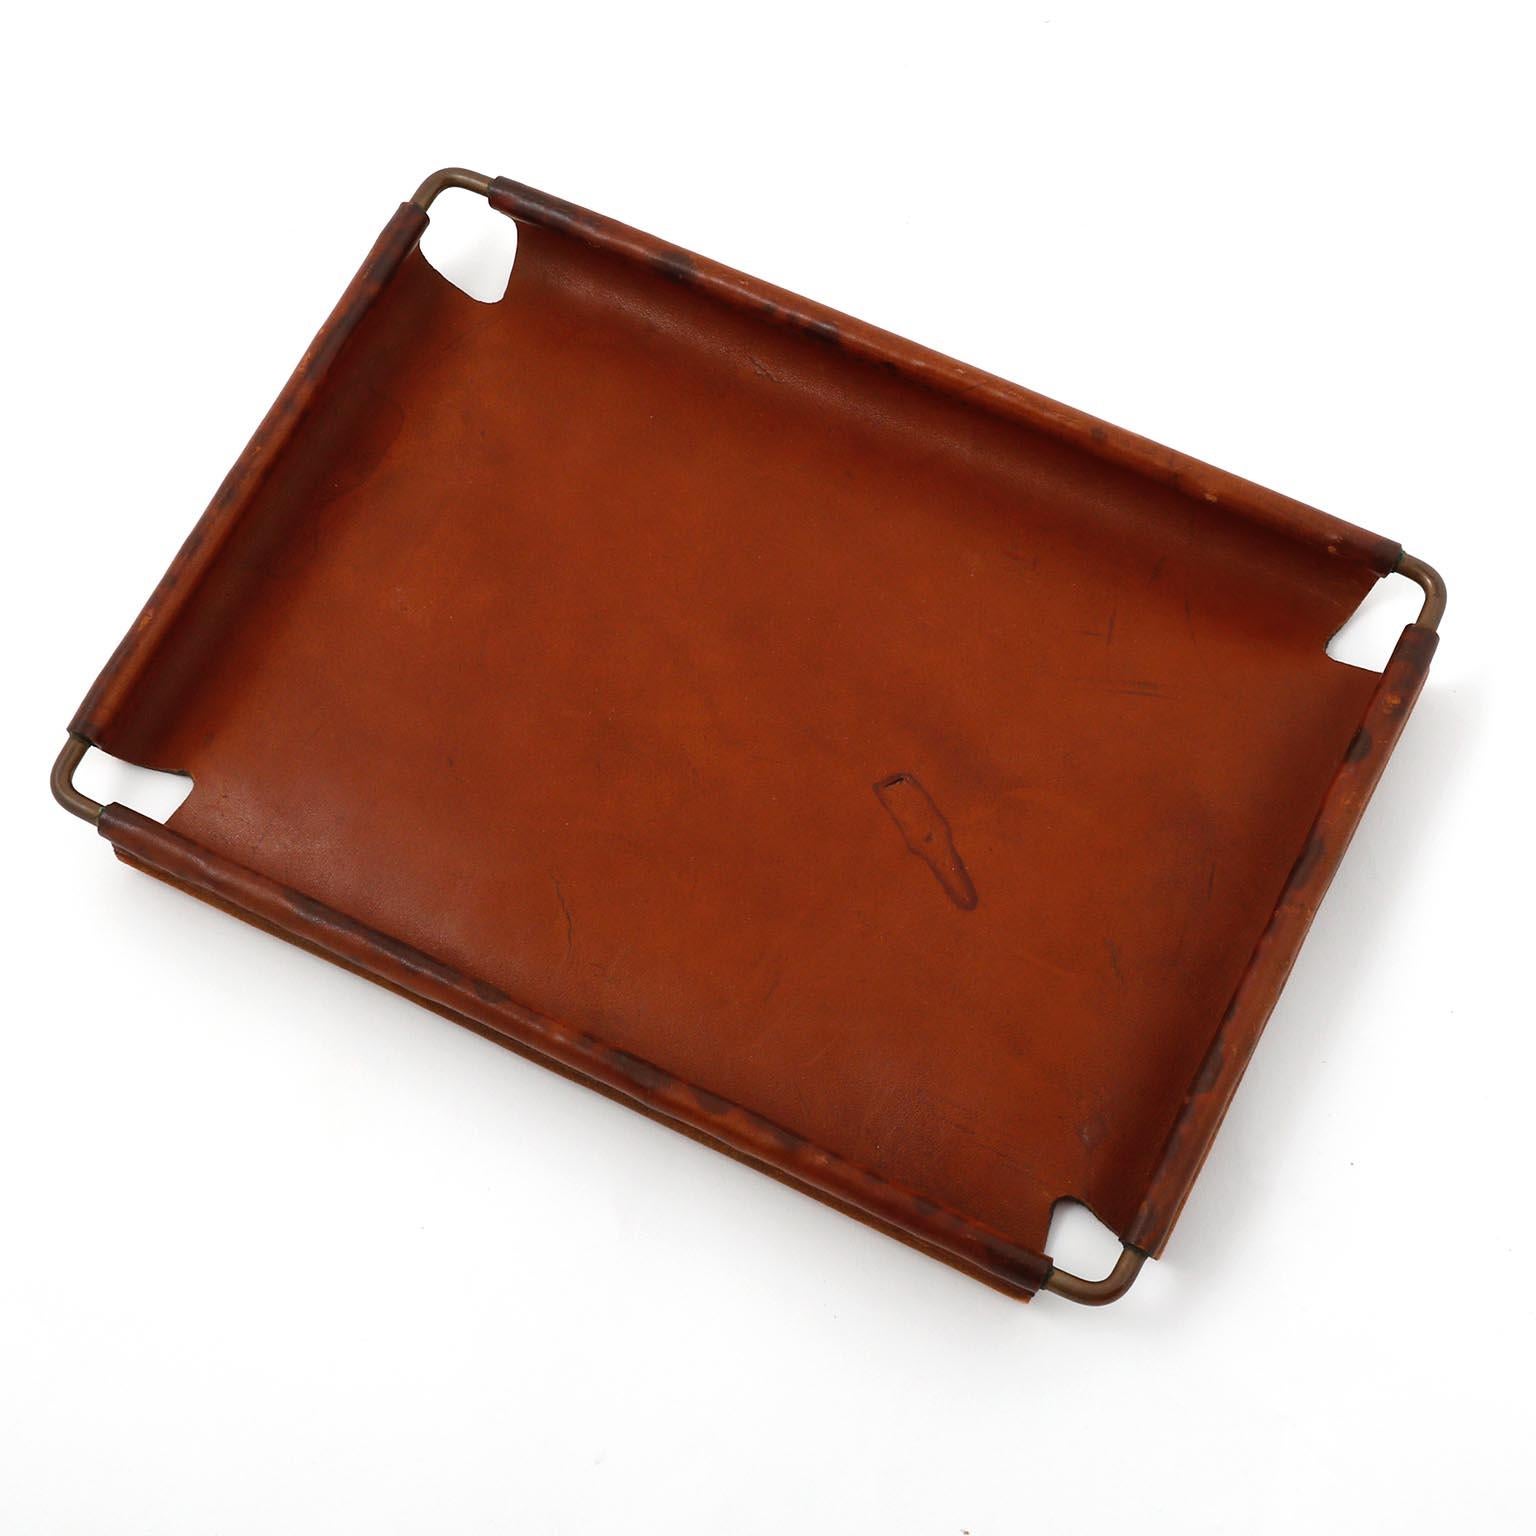 A leather and brass tray designed by Carl Auböck, manufactured by Carl Auböck workshop in midcentury, circa 1950.
The aged brass and leather show signs of wear and use. An authentic handmade piece with nice patina on brass and leather.
This tray